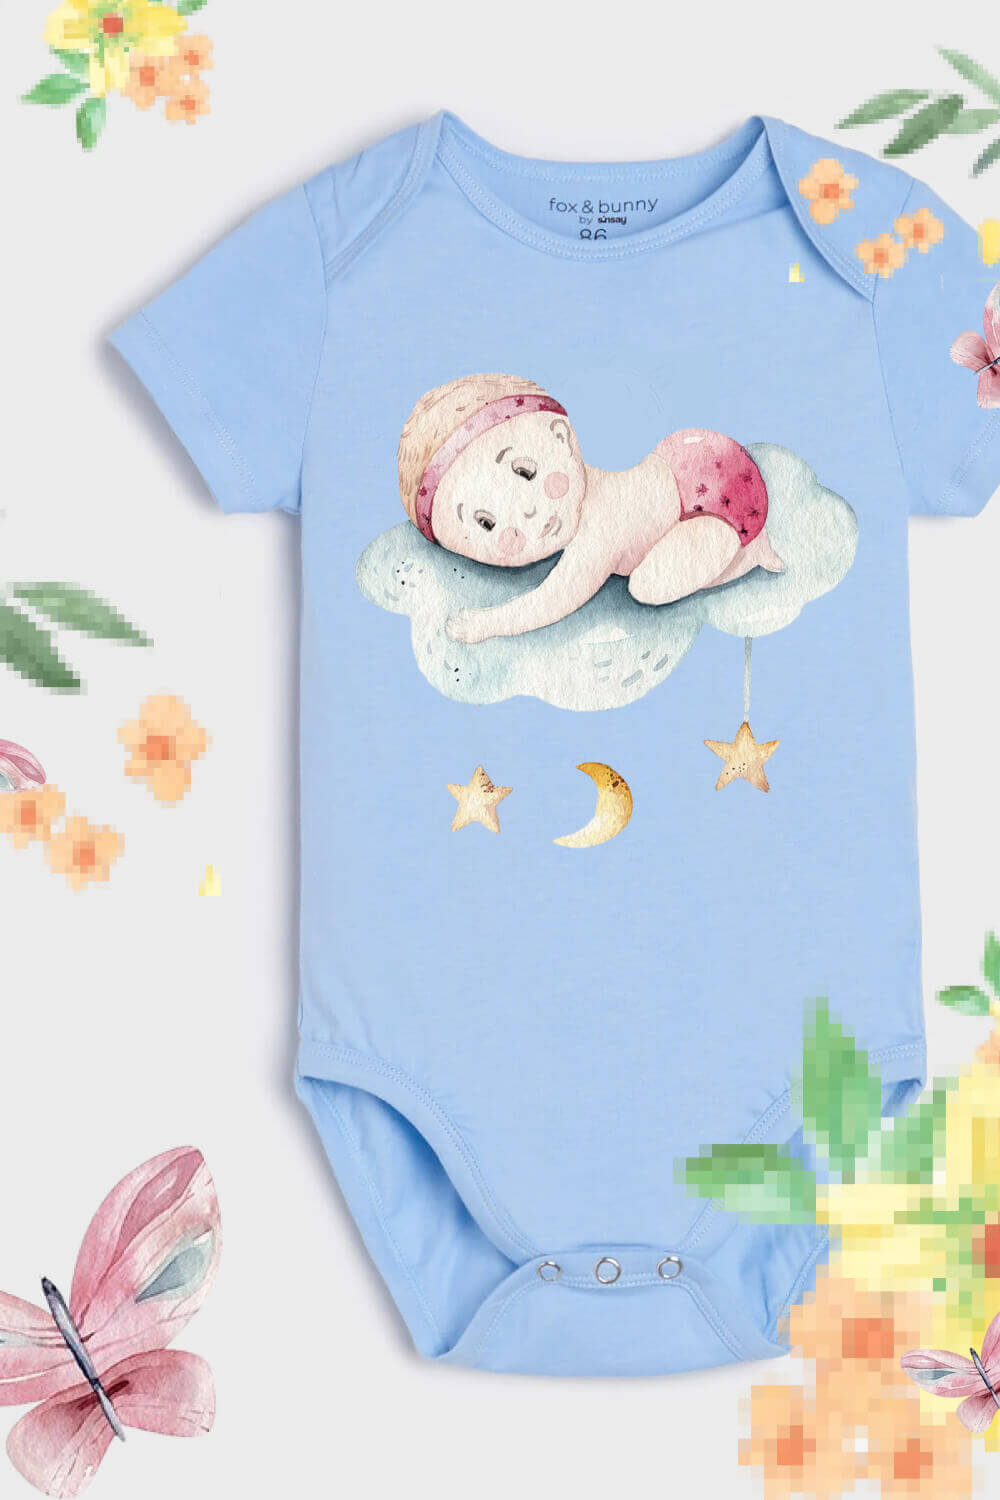 Blue bodysuit with stars and an angel on a cloud.